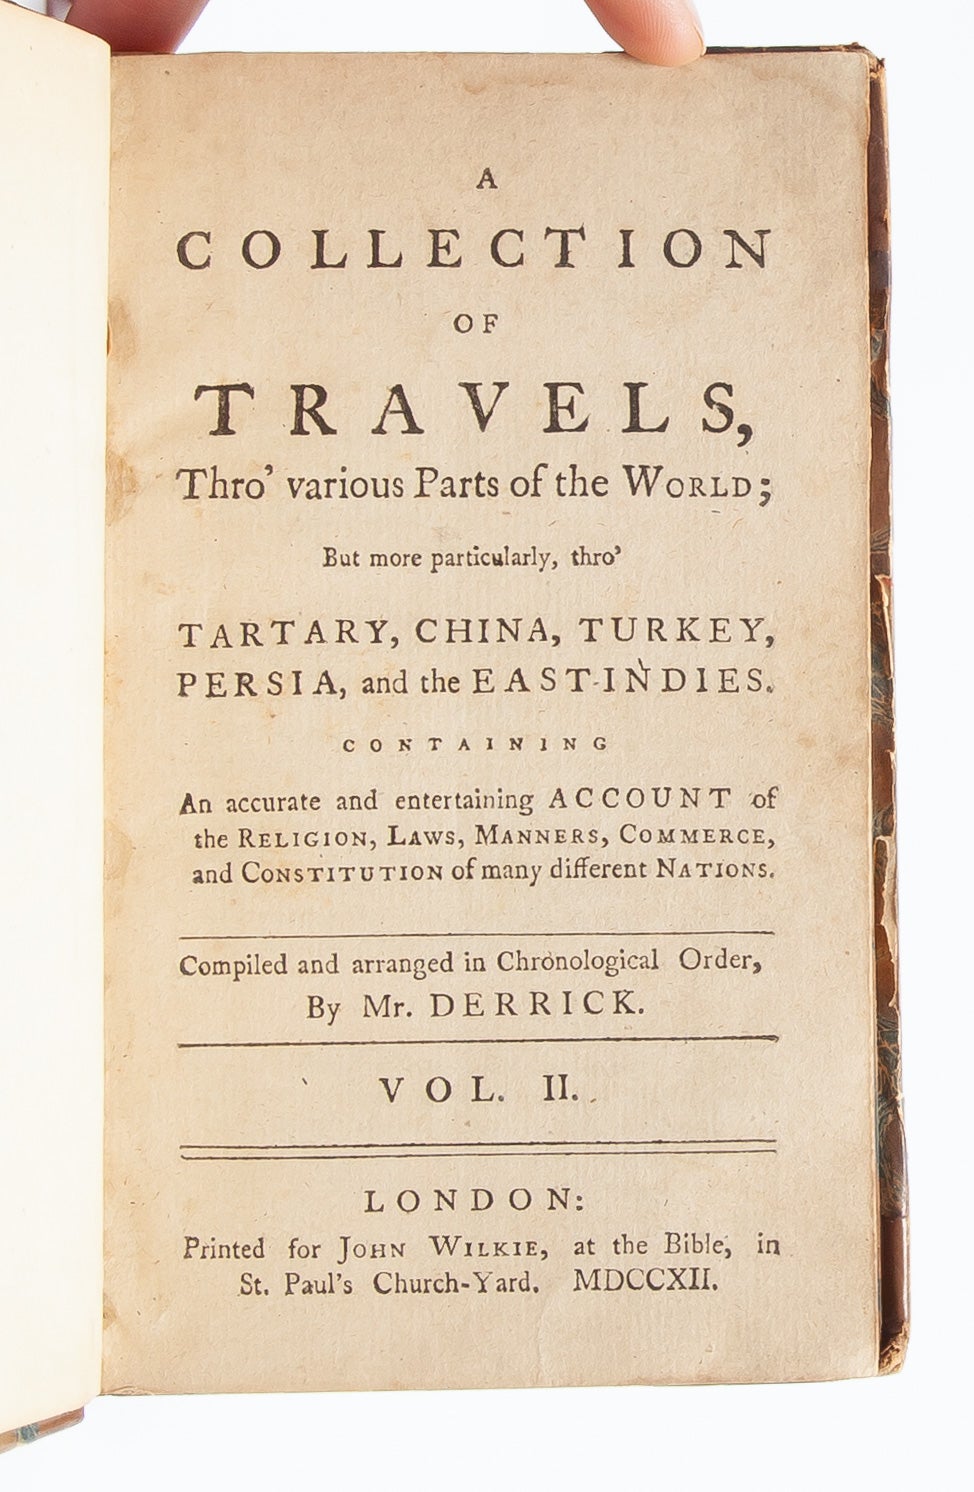 A Collection of Travels Thro Various Parts of the World...Containing an Accurate Account of the Religion, Laws, Manners, Commerce, and Constitution of Many Different Nations in 2 vols photo